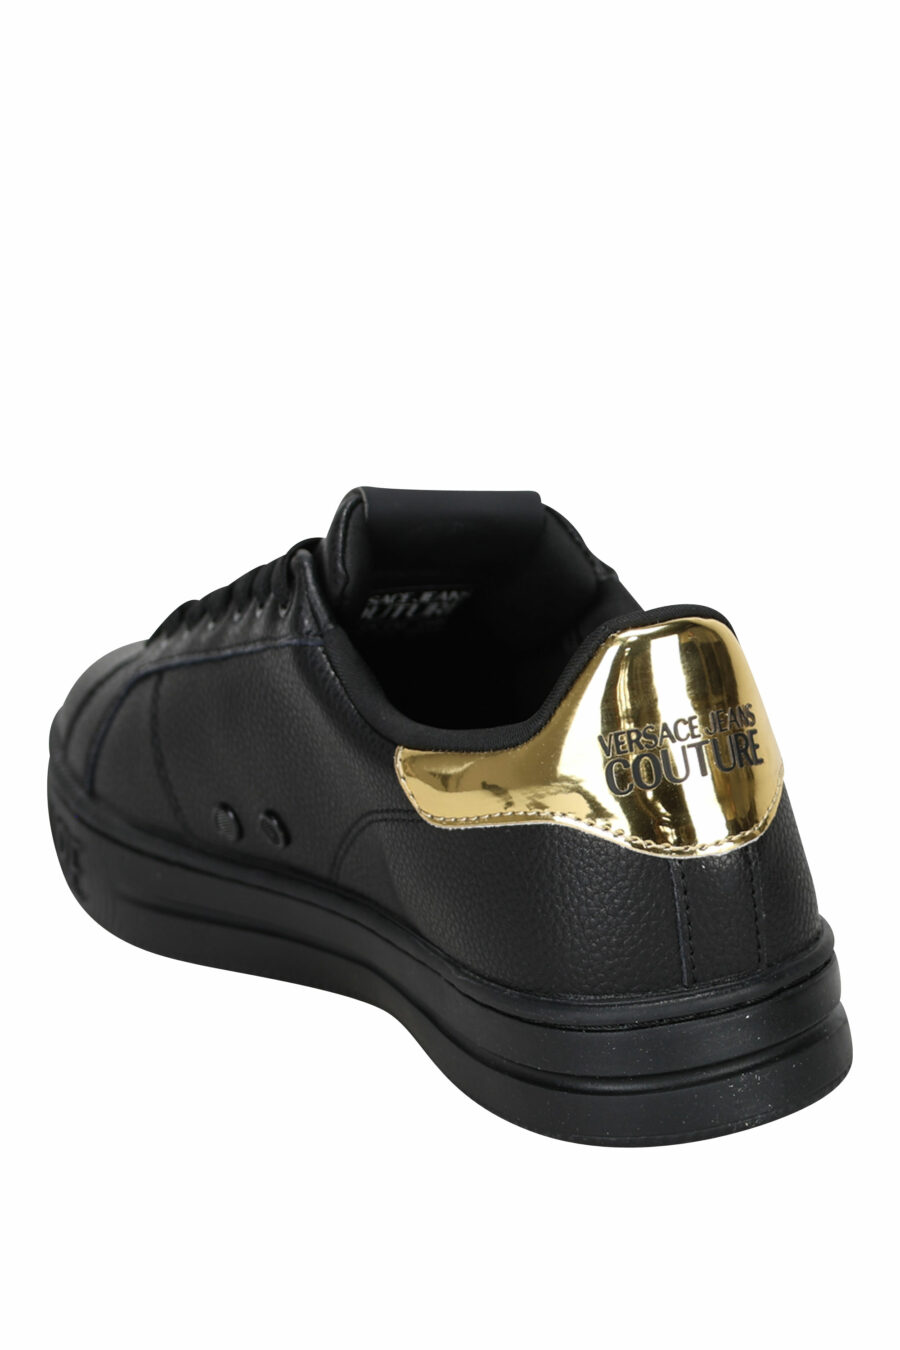 Black leather trainers with gold details and circular logo - 8052019453560 3